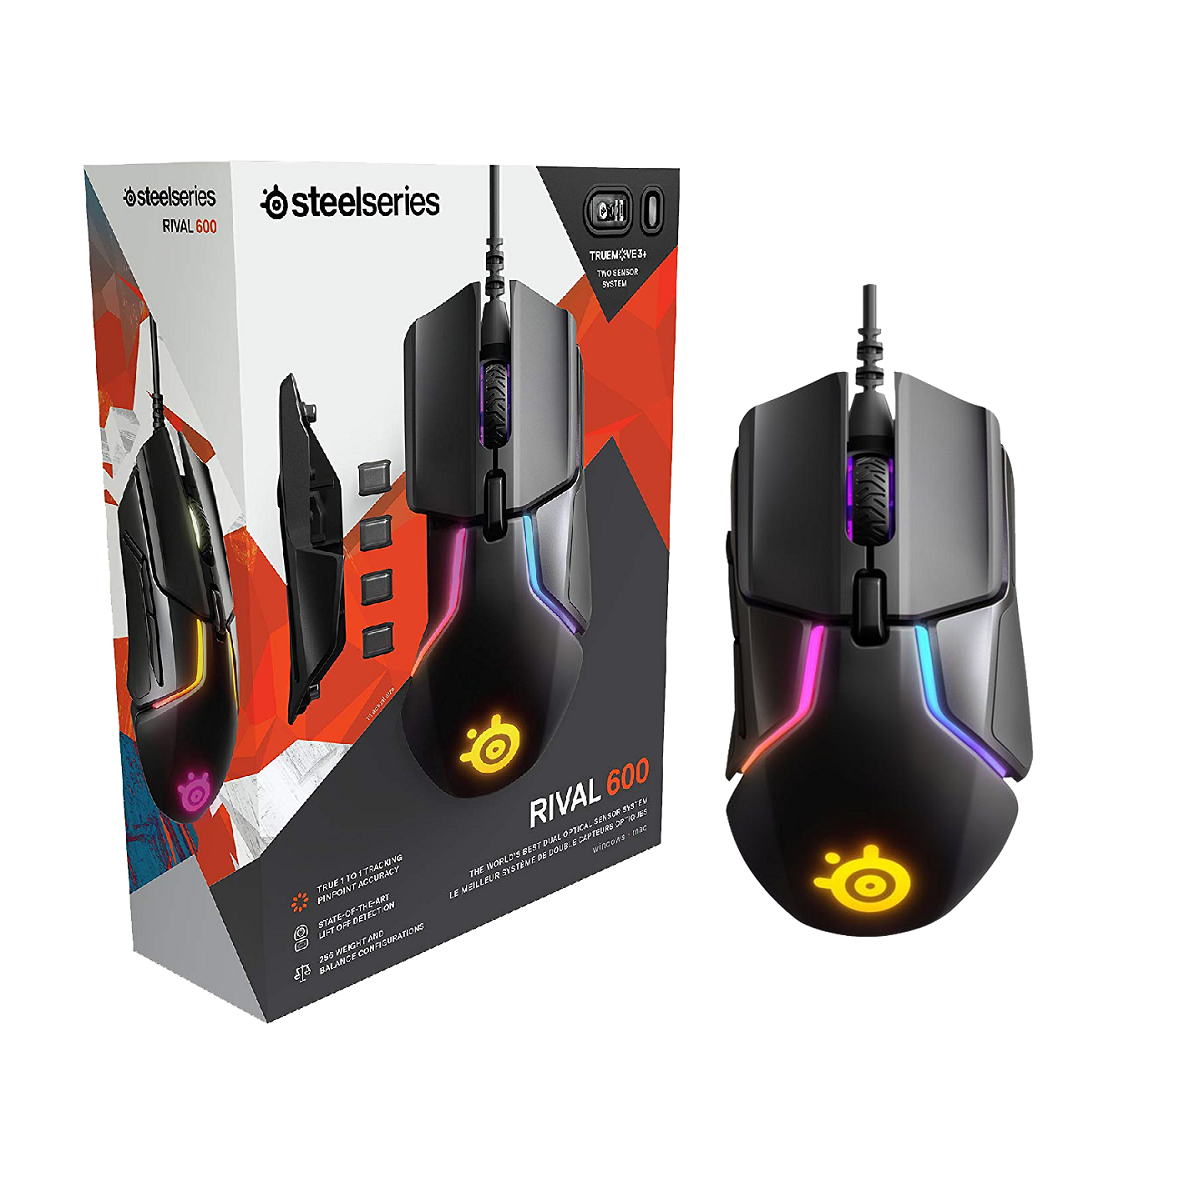 SteelSeries Rival 600 front - eSport Nigeria Announces Gaming Partnership with TechXhub